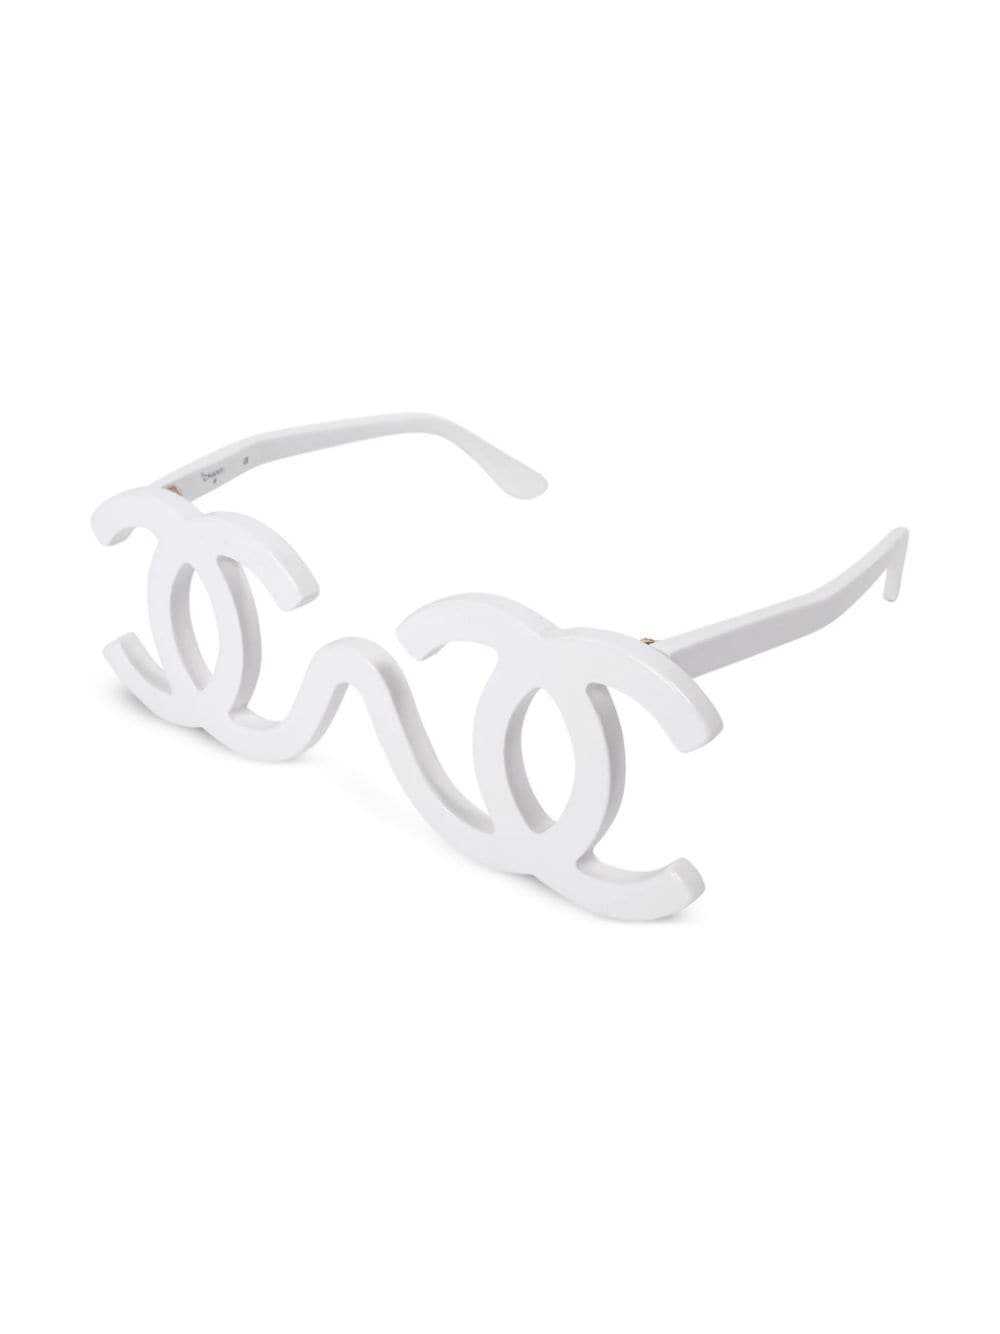 CHANEL Pre-Owned 1994 CC Runway sunglasses - White - image 2